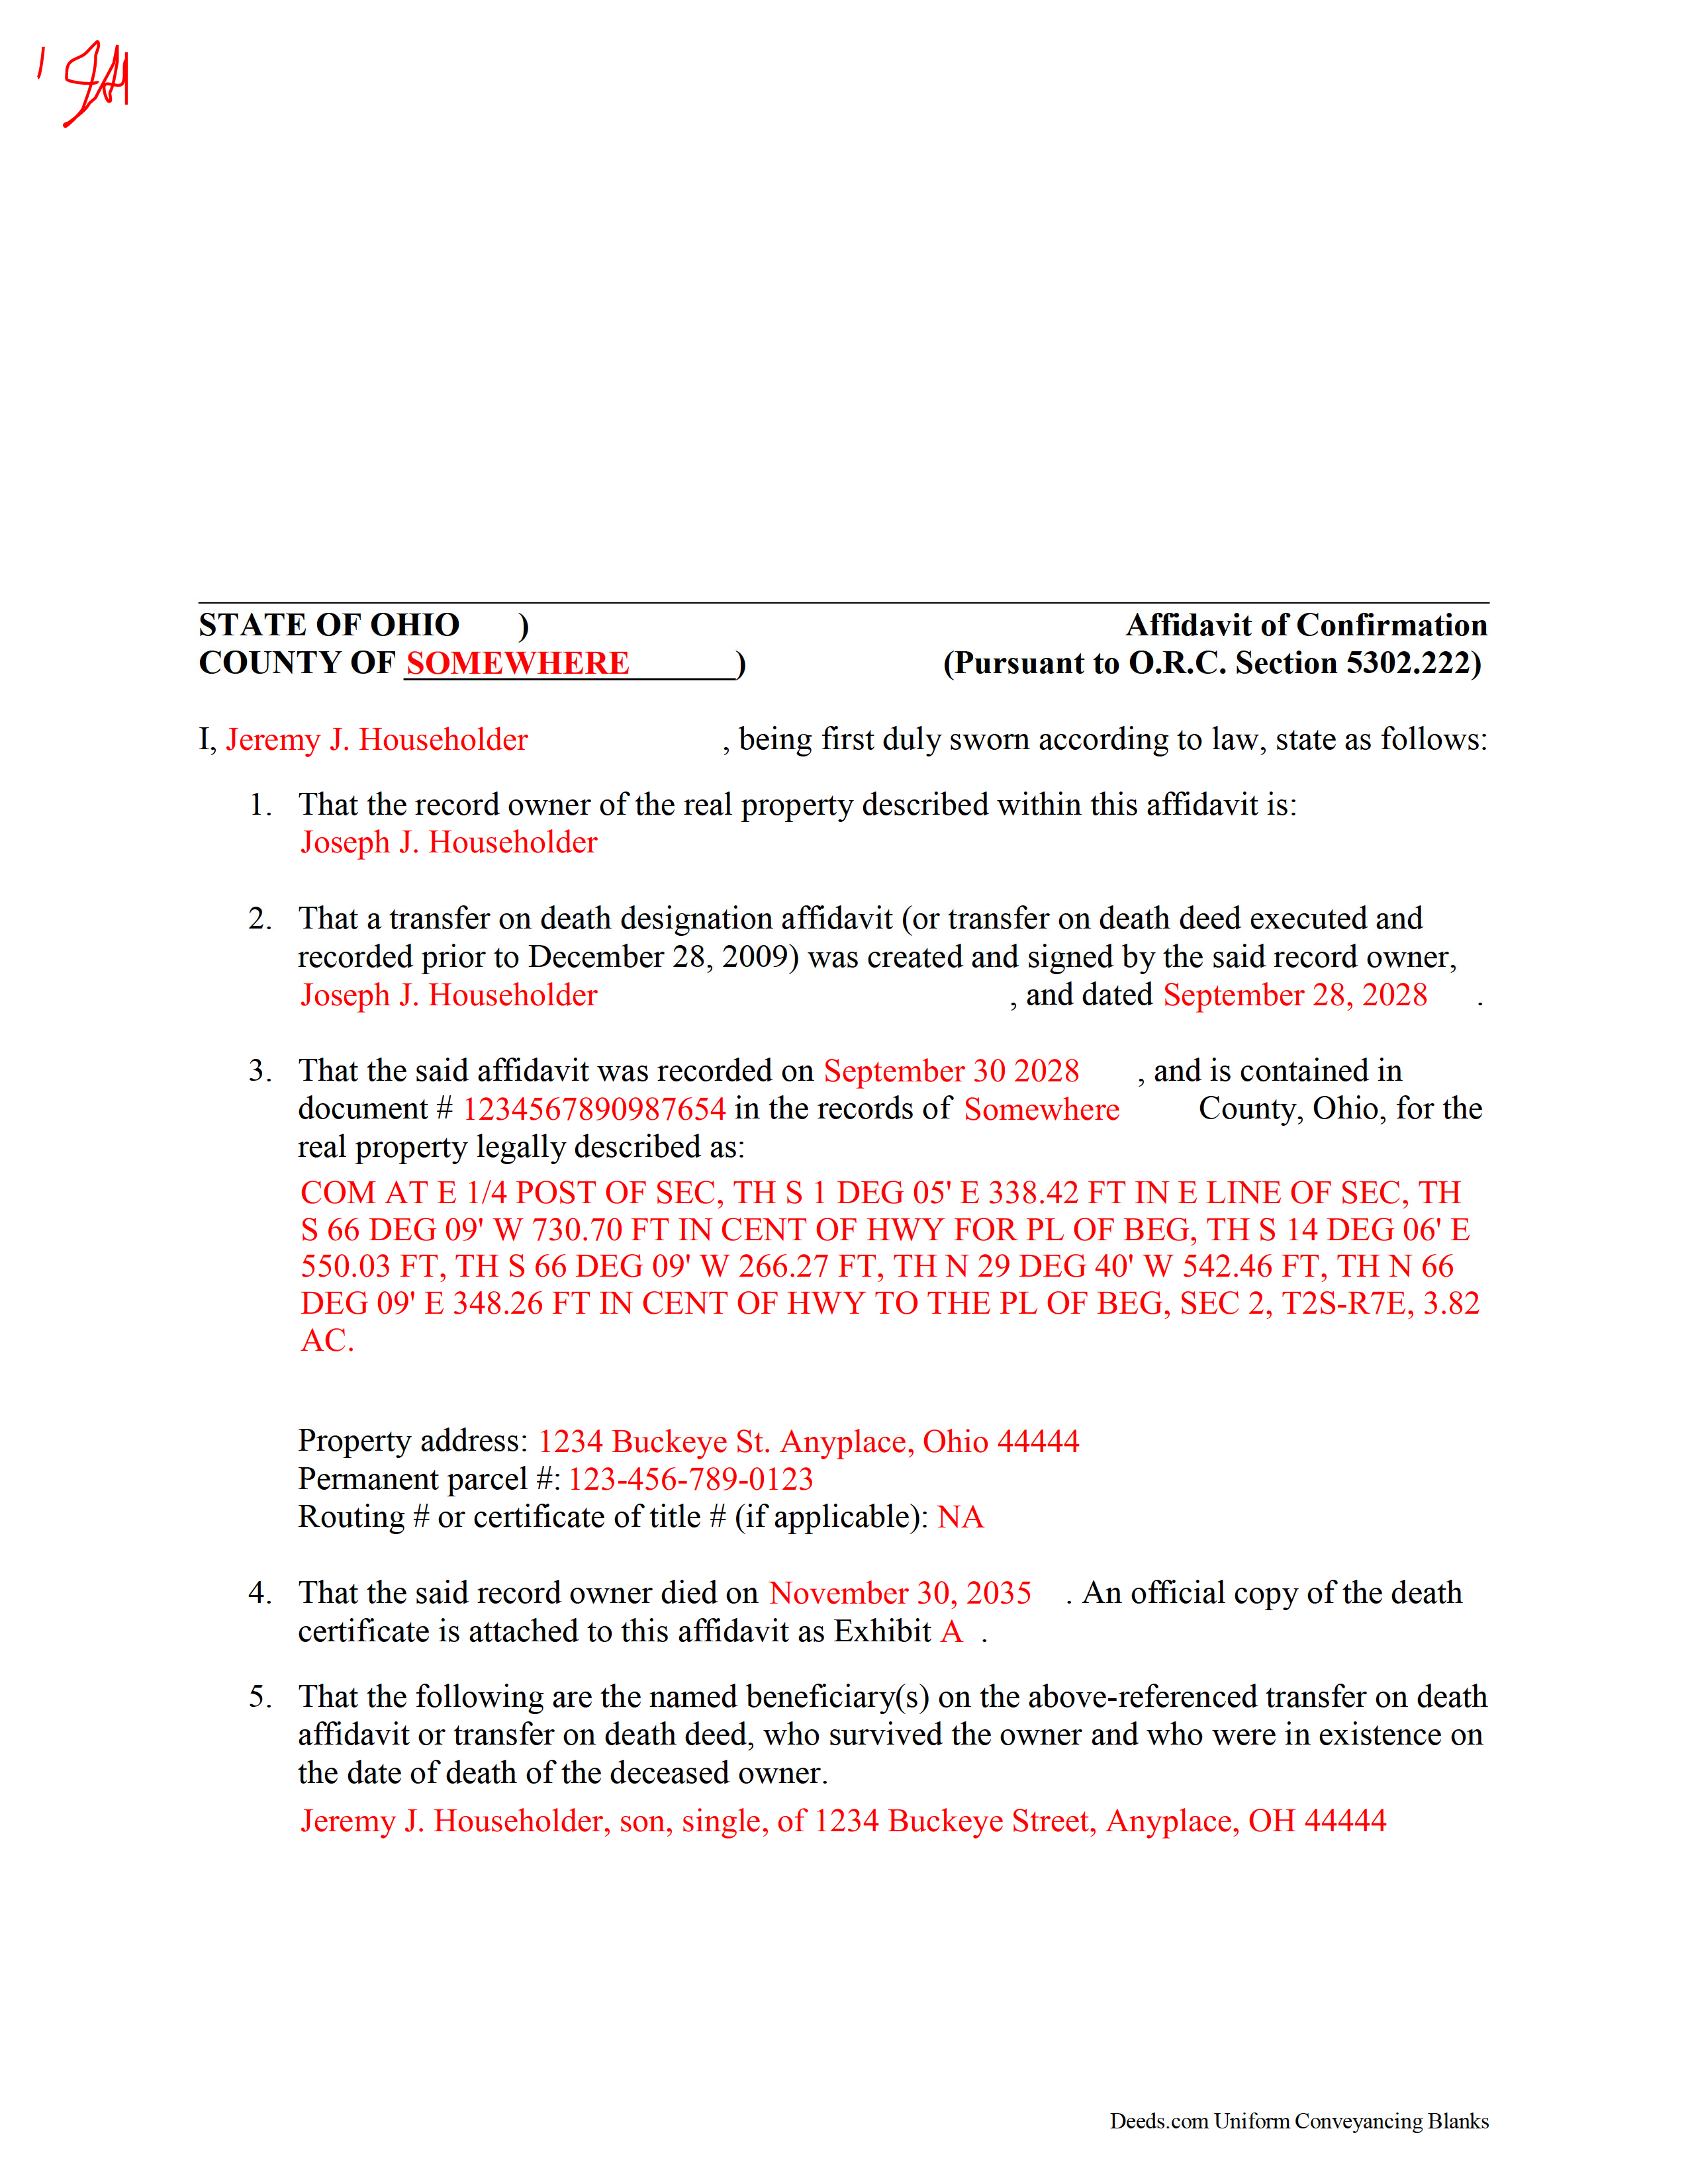 Completed Example of the Affidavit of Confirmation Document